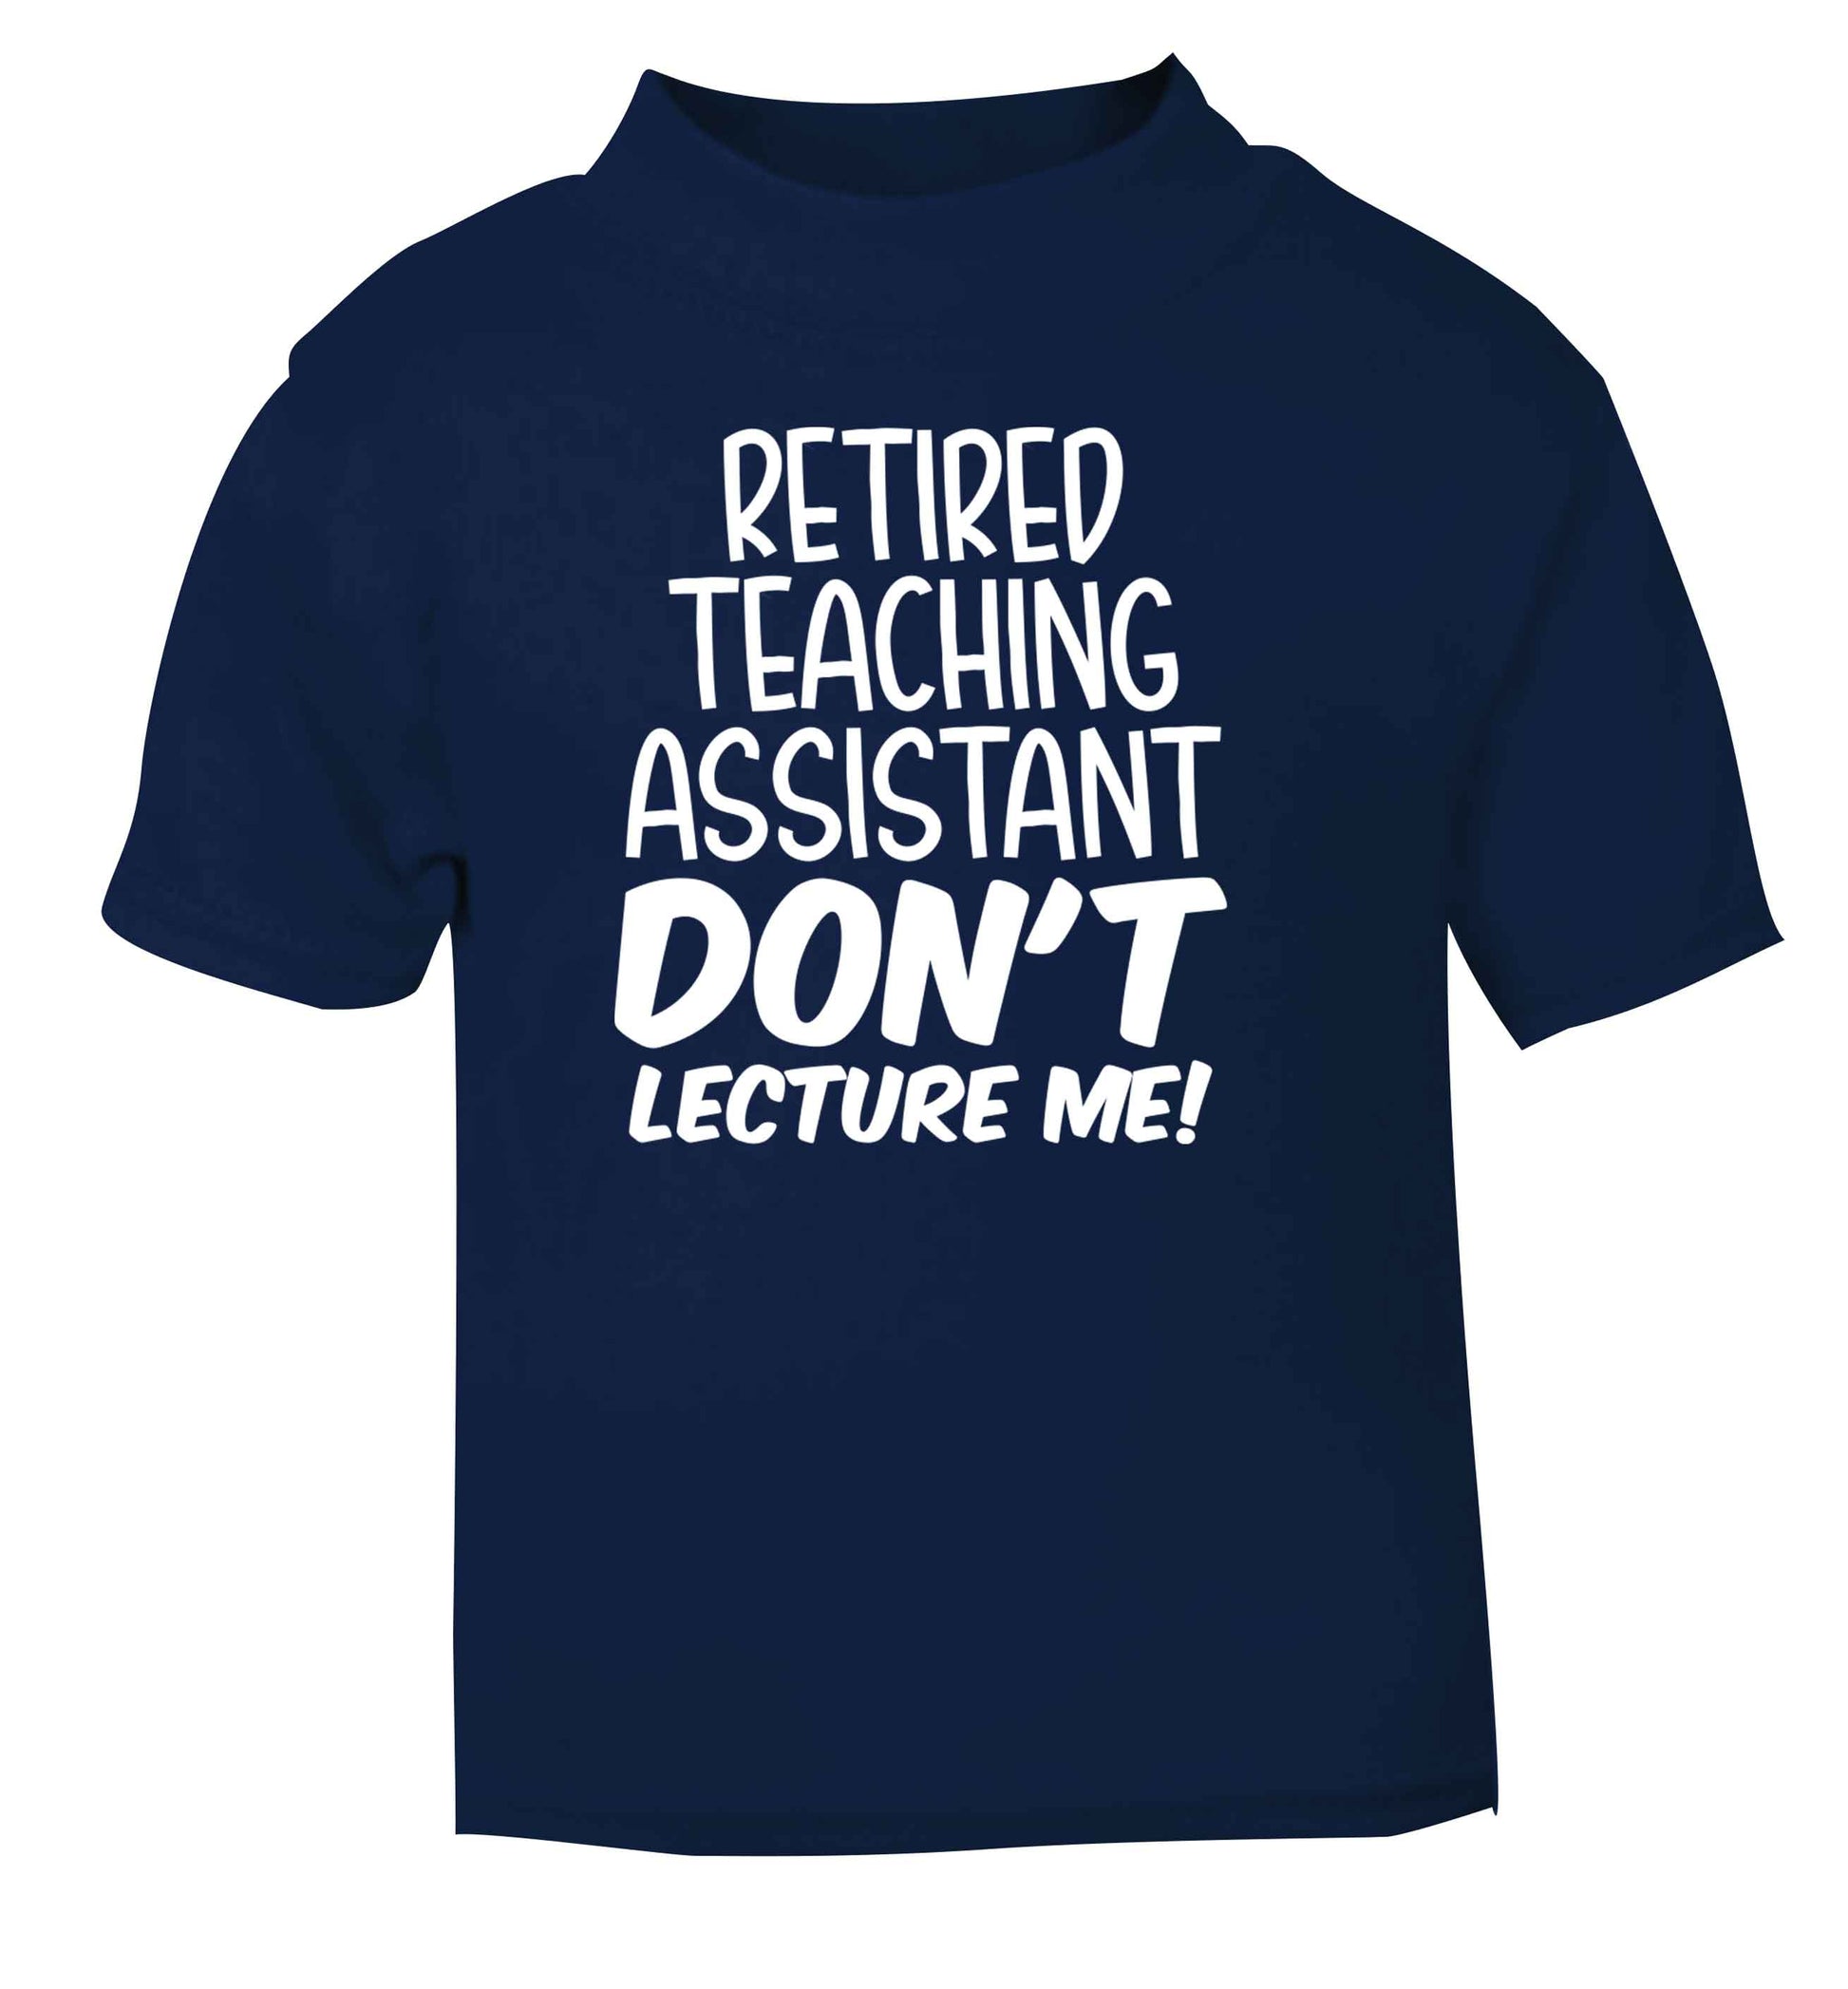 Retired teaching assistant don't lecture me navy Baby Toddler Tshirt 2 Years